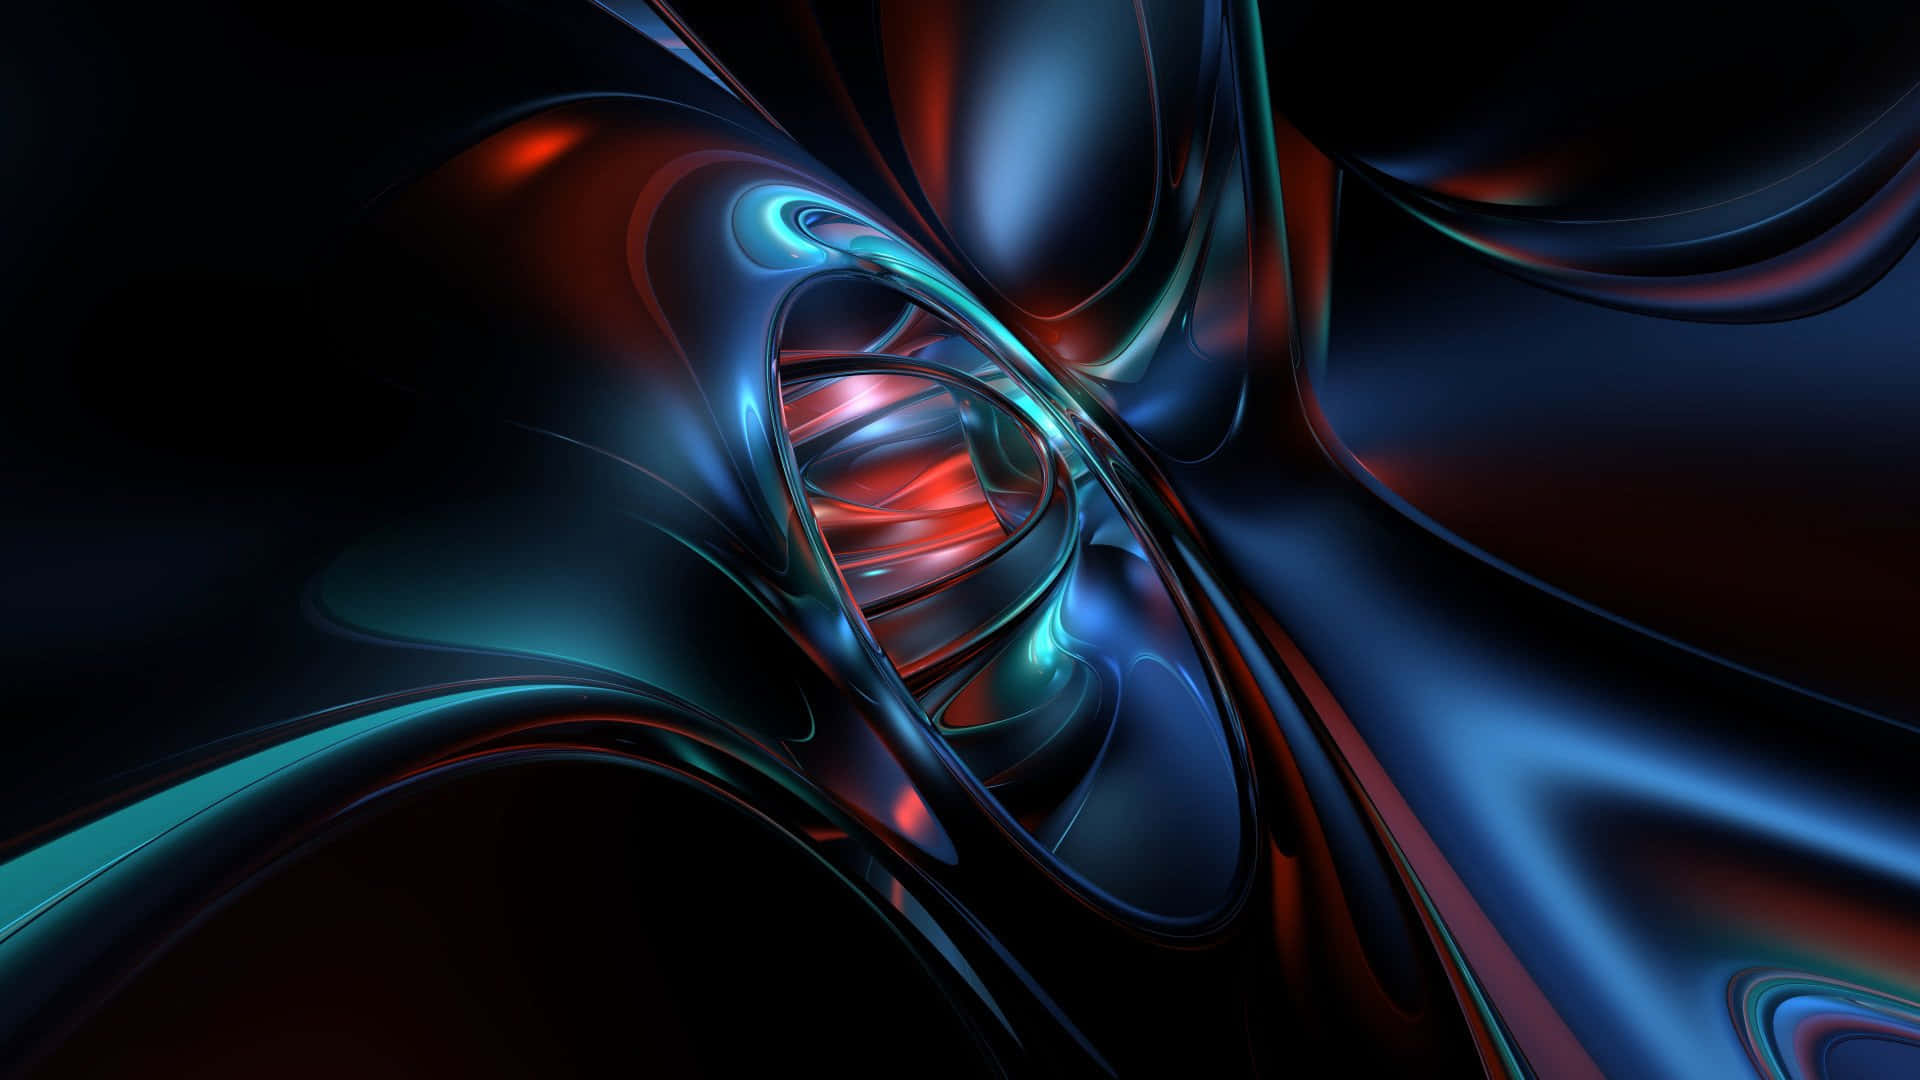 Enjoy the Cool and Colorful Abstract Art Wallpaper